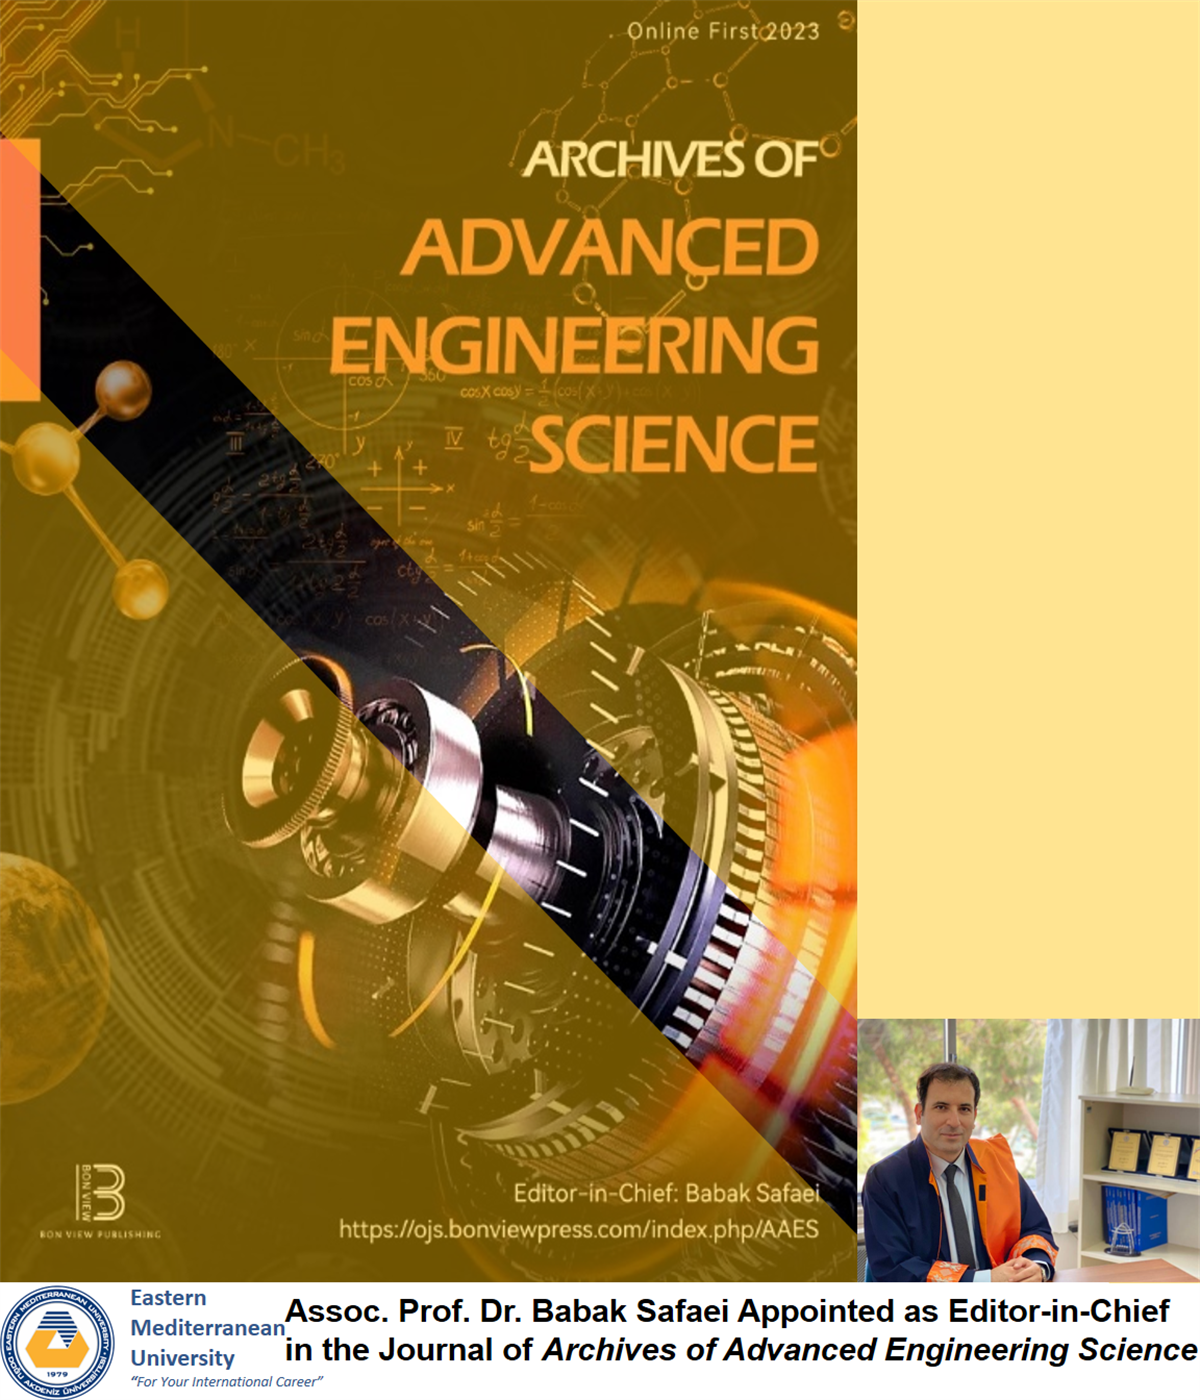 Assoc. Prof. Dr. Babak Safei Appointed as Editor-in-Chief in the Journal of "Archives of Advanced Engineering Science"